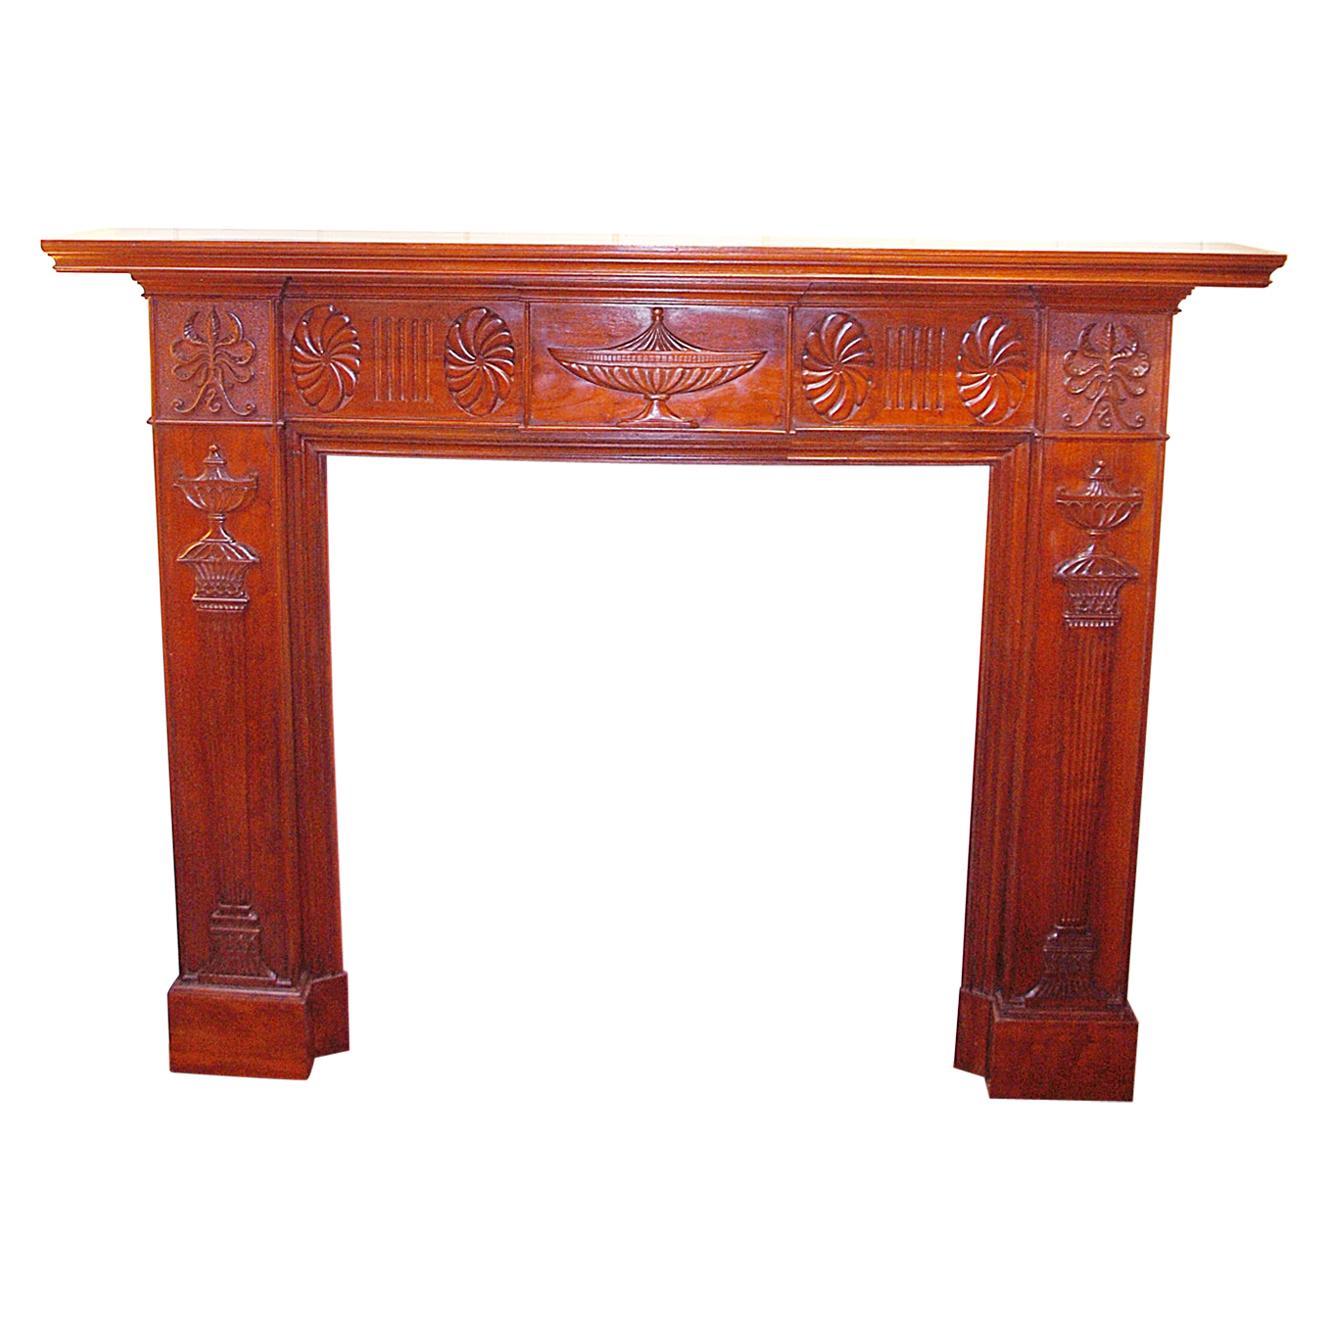 English 19th Century Adam Style Carved Mahogany Fireplace Surround and Mantel